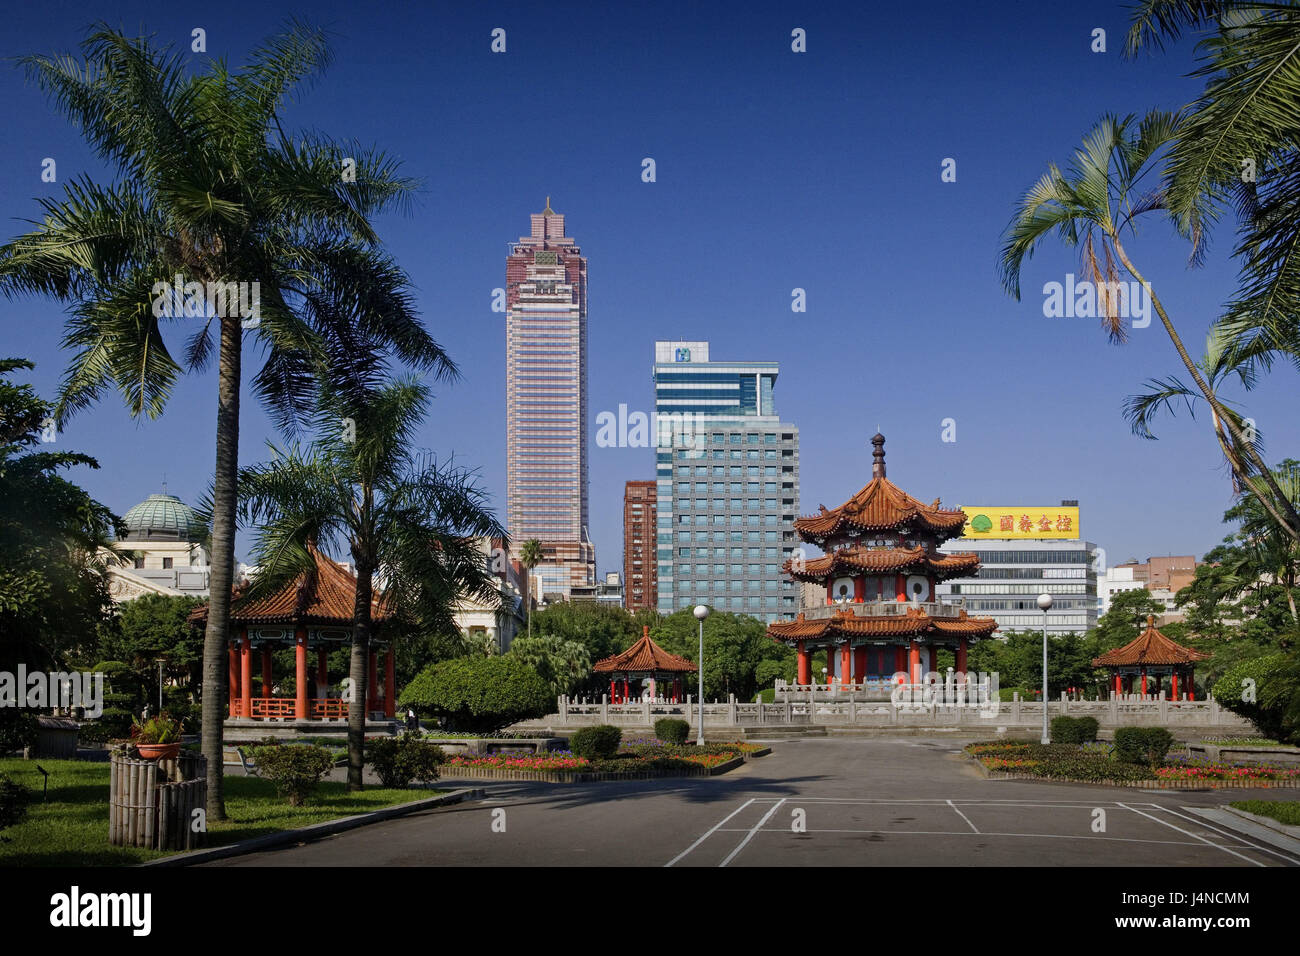 Taiwan, Taipeh, Peace park, Asia, Eastern Asia, town, capital, building, structures, architecture, peace park, palms, Stock Photo